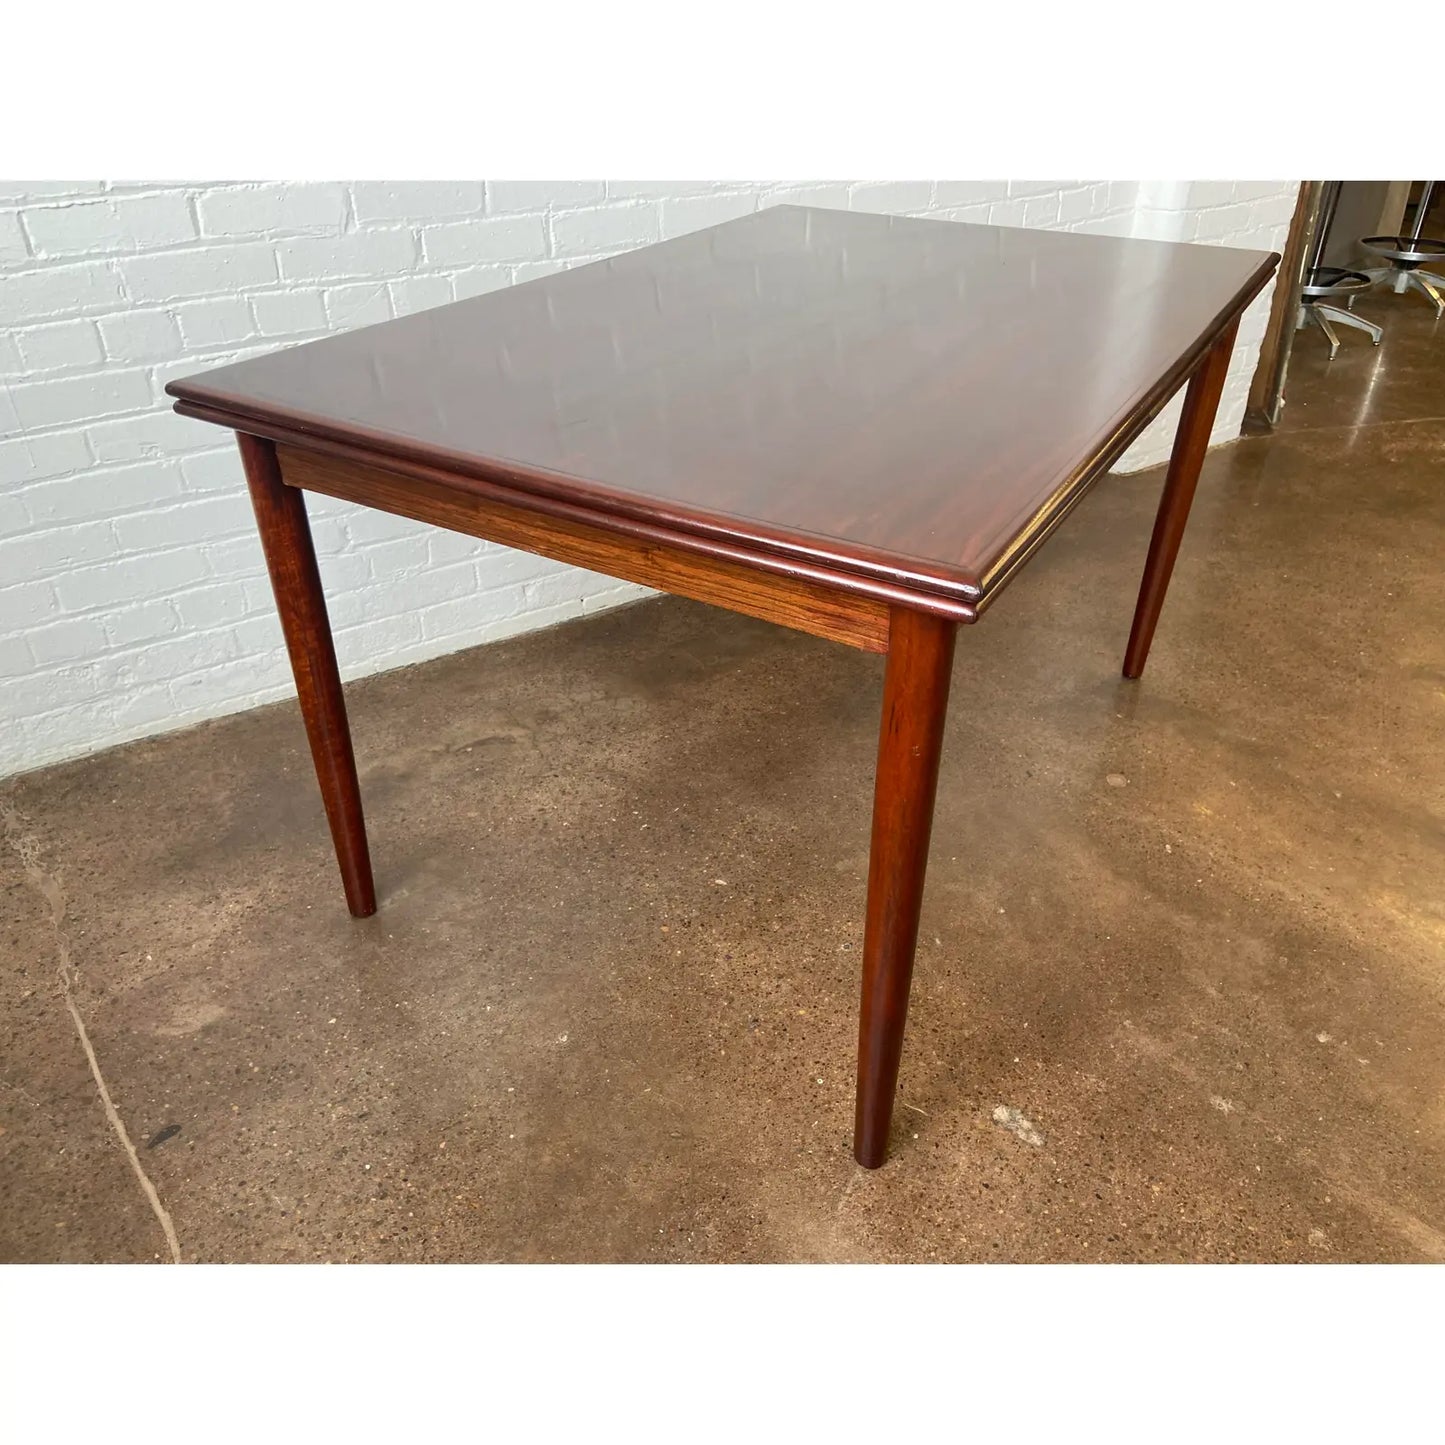 EXPANDABLE DANISH ROSEWOOD DINING TABLE WITH DRAW LEAF